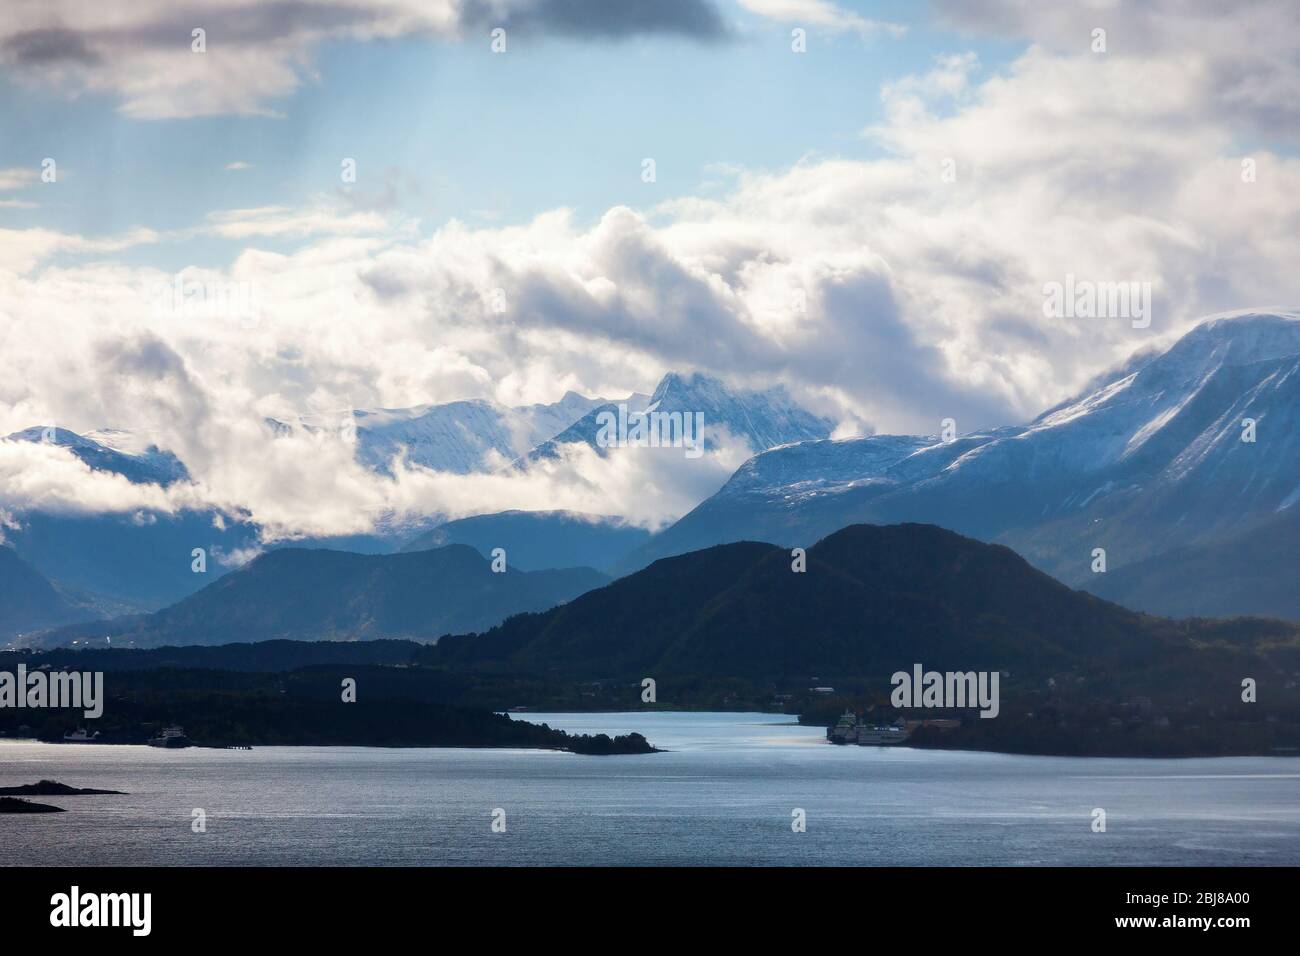 View of mountains and fjords in Norway Stock Photo